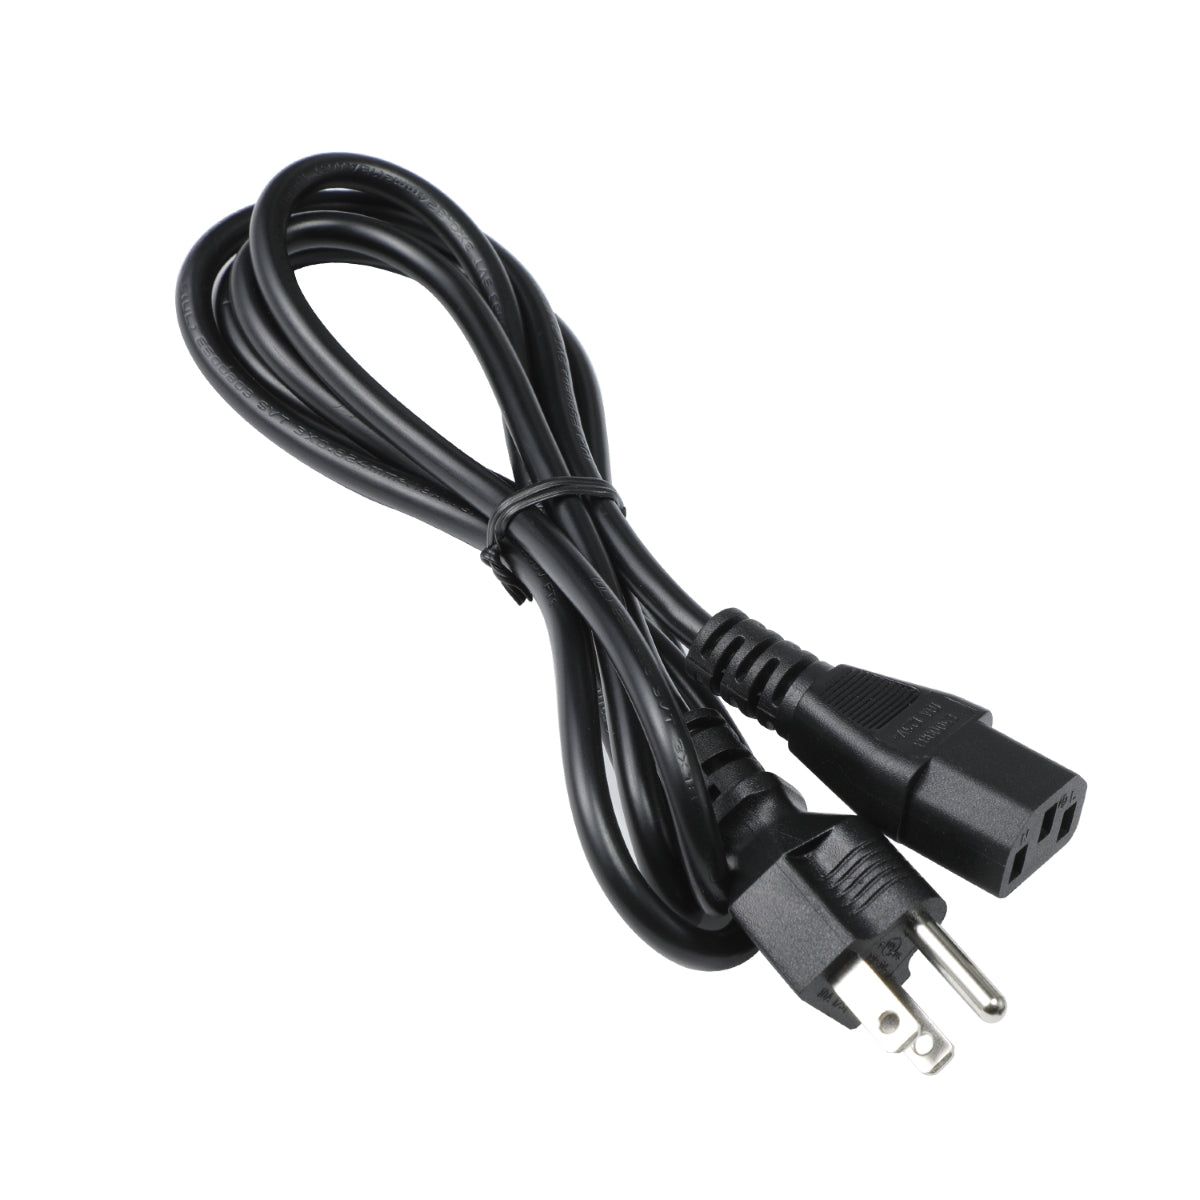 Power Cord for Acer Nitro XF252Q Monitor